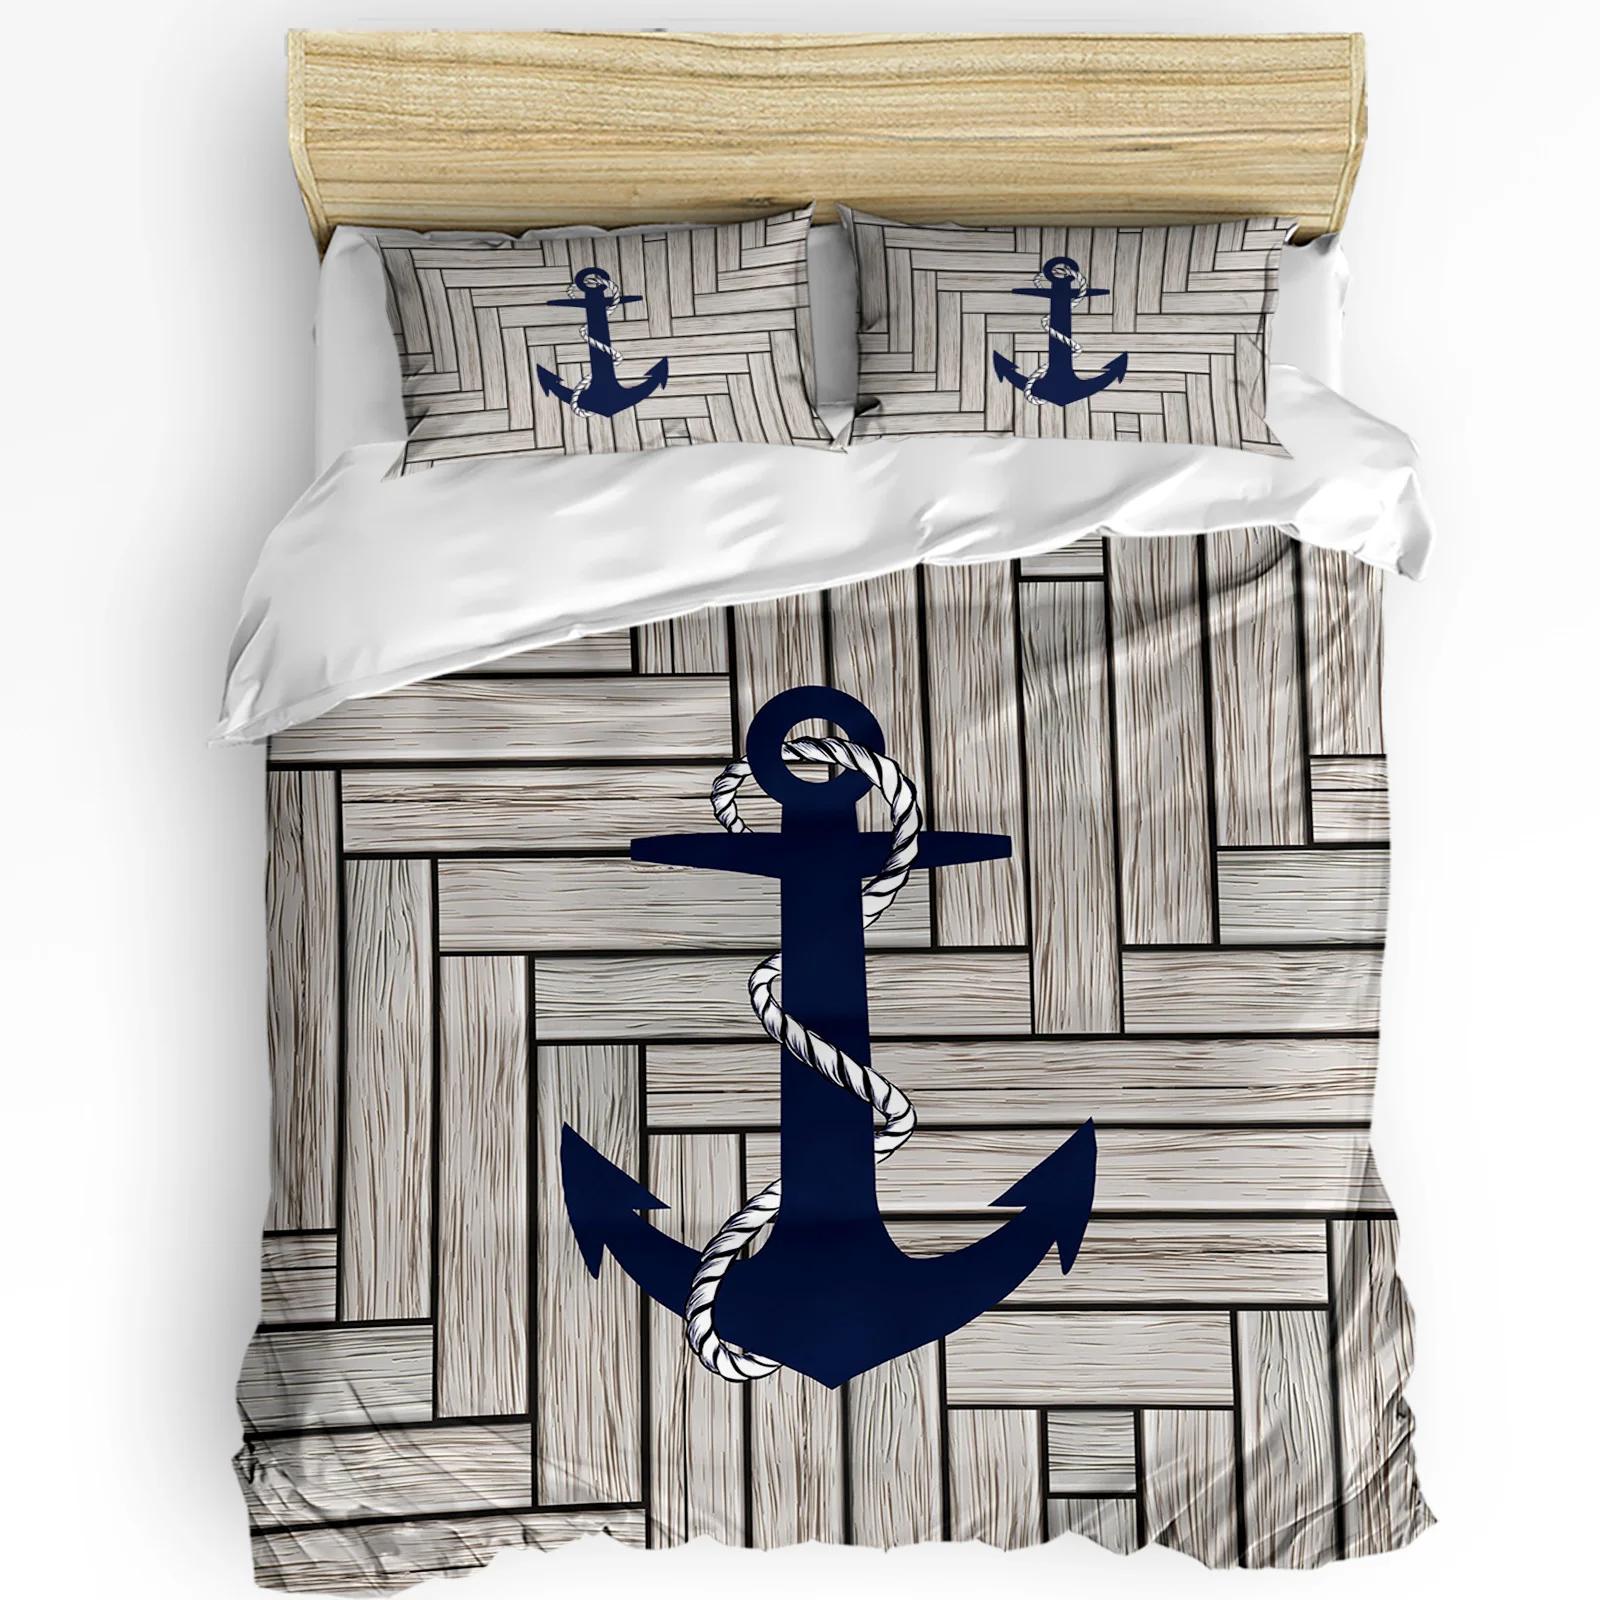 Wood Texture Marine Anchor Duvet Cover Bed Bedding Set Home Textile Quilt Cover Pillowcases Bedroom Double Bedding S